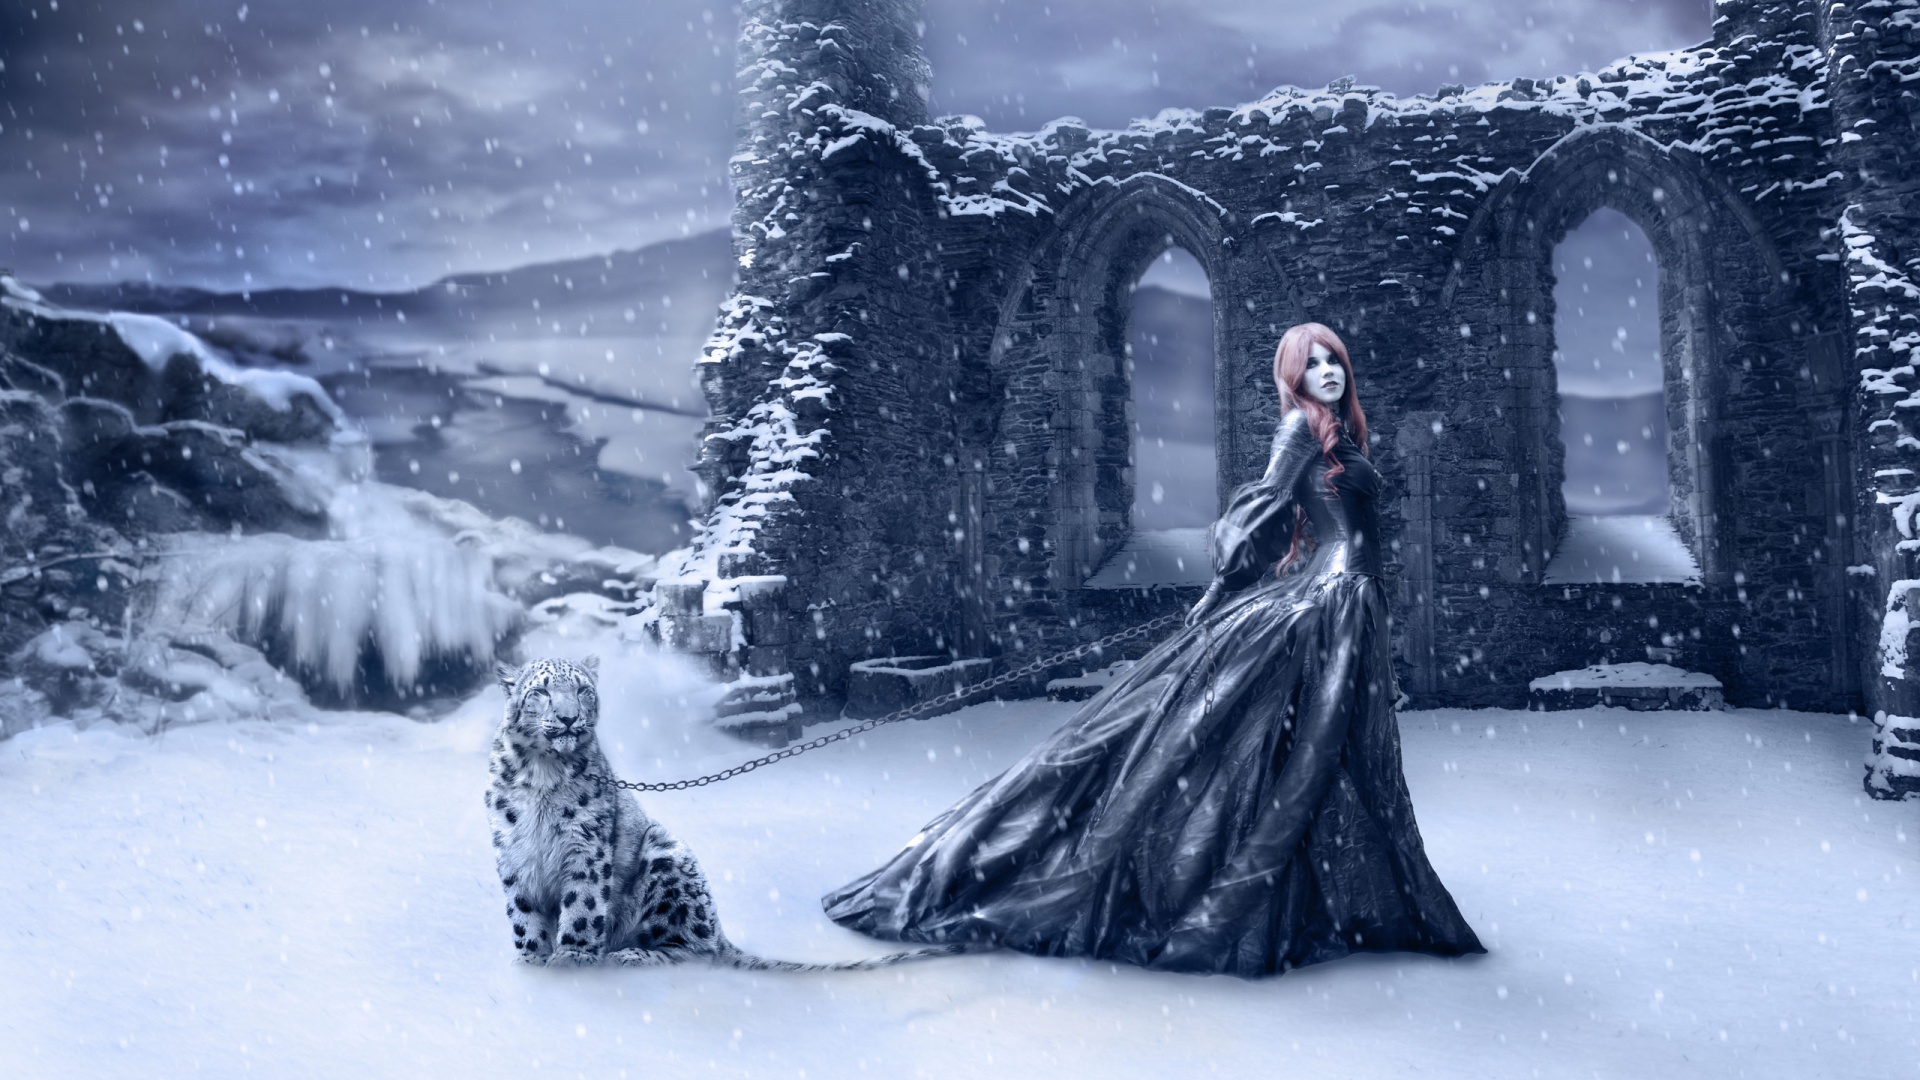 Free download Fantasy Winter Wallpaper High Definition High Quality Widescreen [1920x1080] for your Desktop, Mobile & Tablet. Explore Winter Widescreen Wallpaper. Winter Wallpaper For Computer, Widescreen Winter Wallpaper 1440x